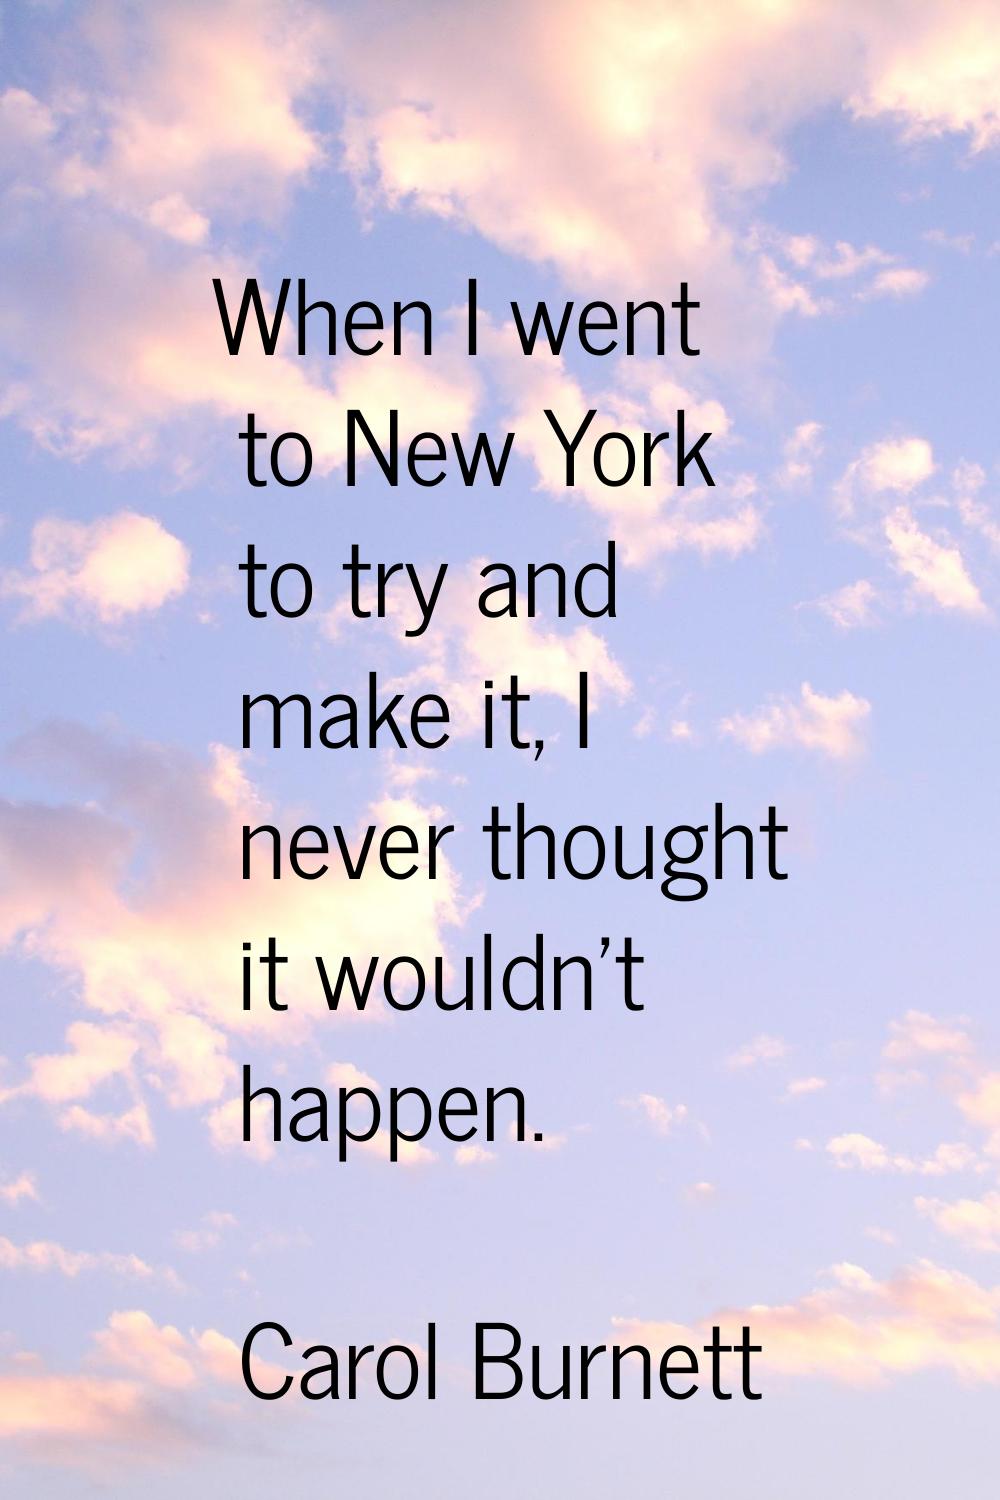 When I went to New York to try and make it, I never thought it wouldn't happen.